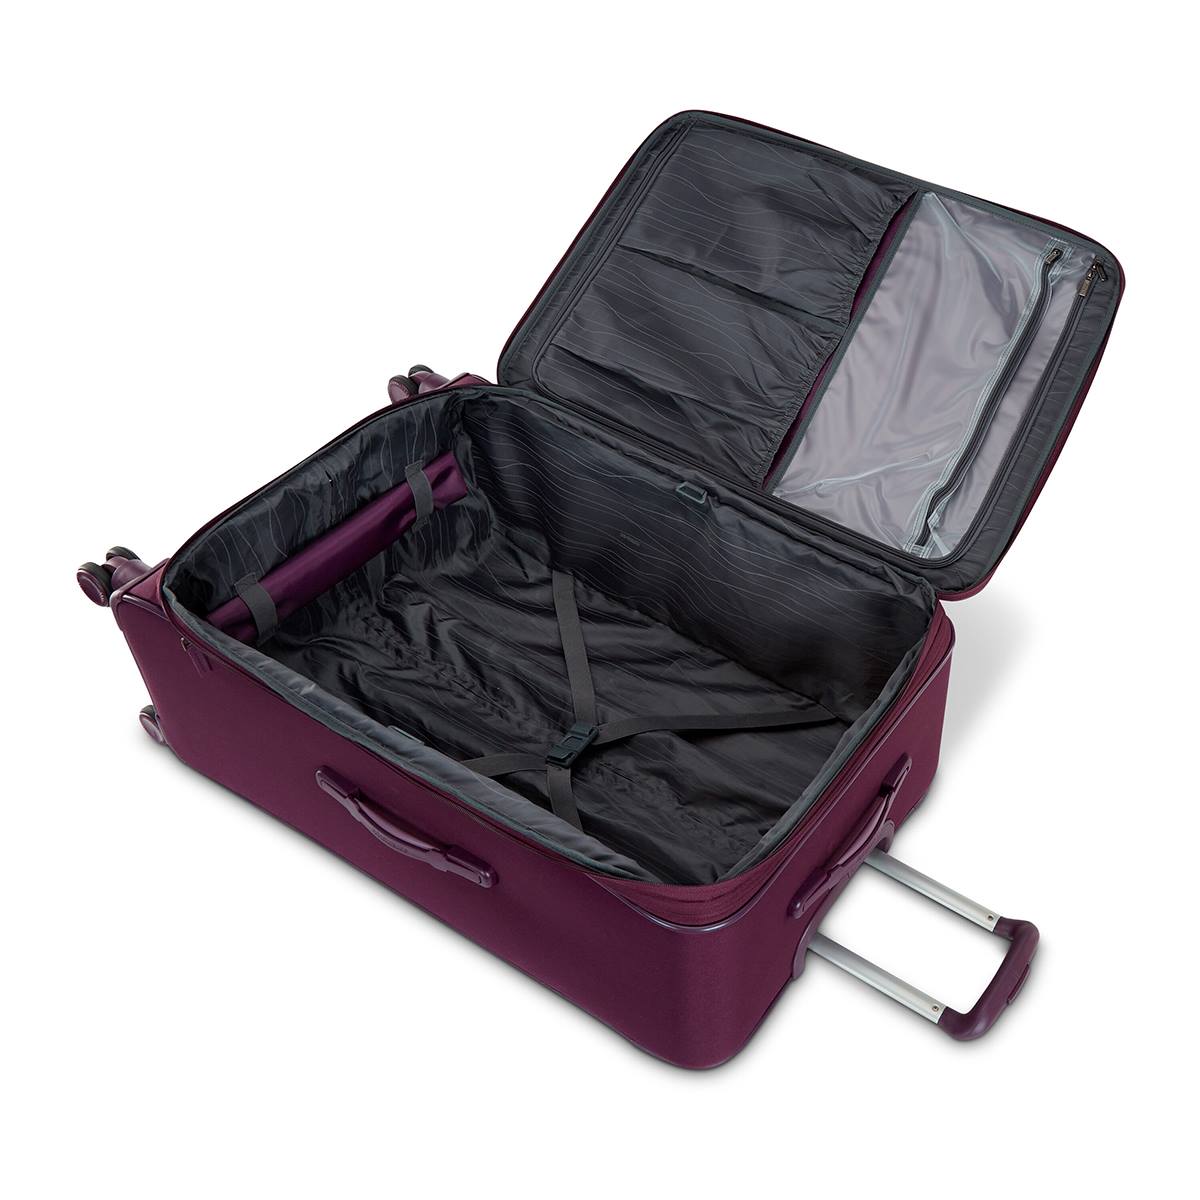 American Tourister(R) Cascade 28in. Spinner Luggage